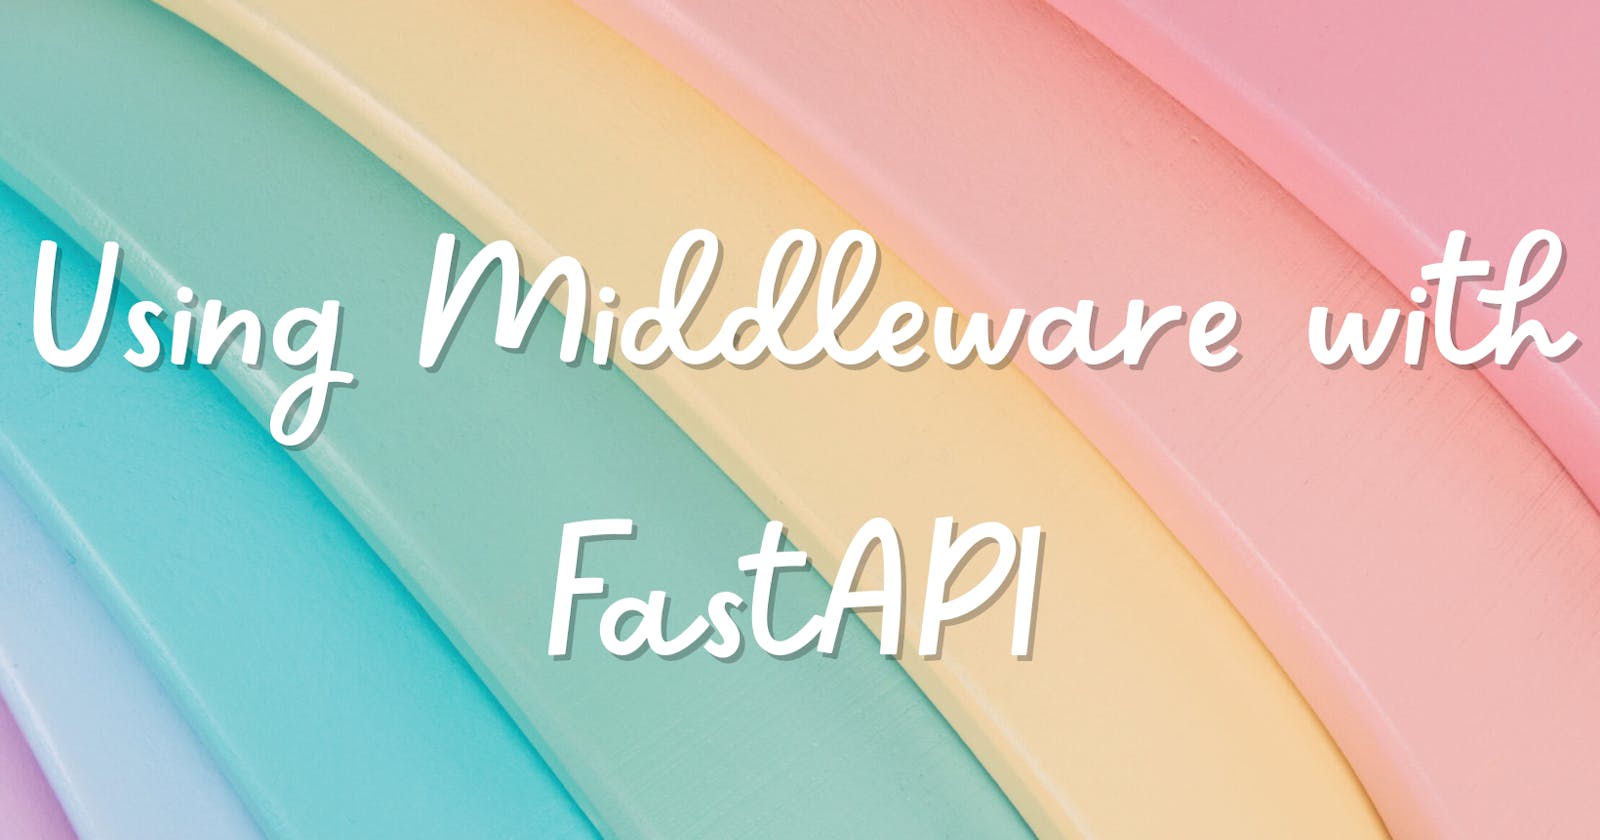 Using Middleware with FastAPI